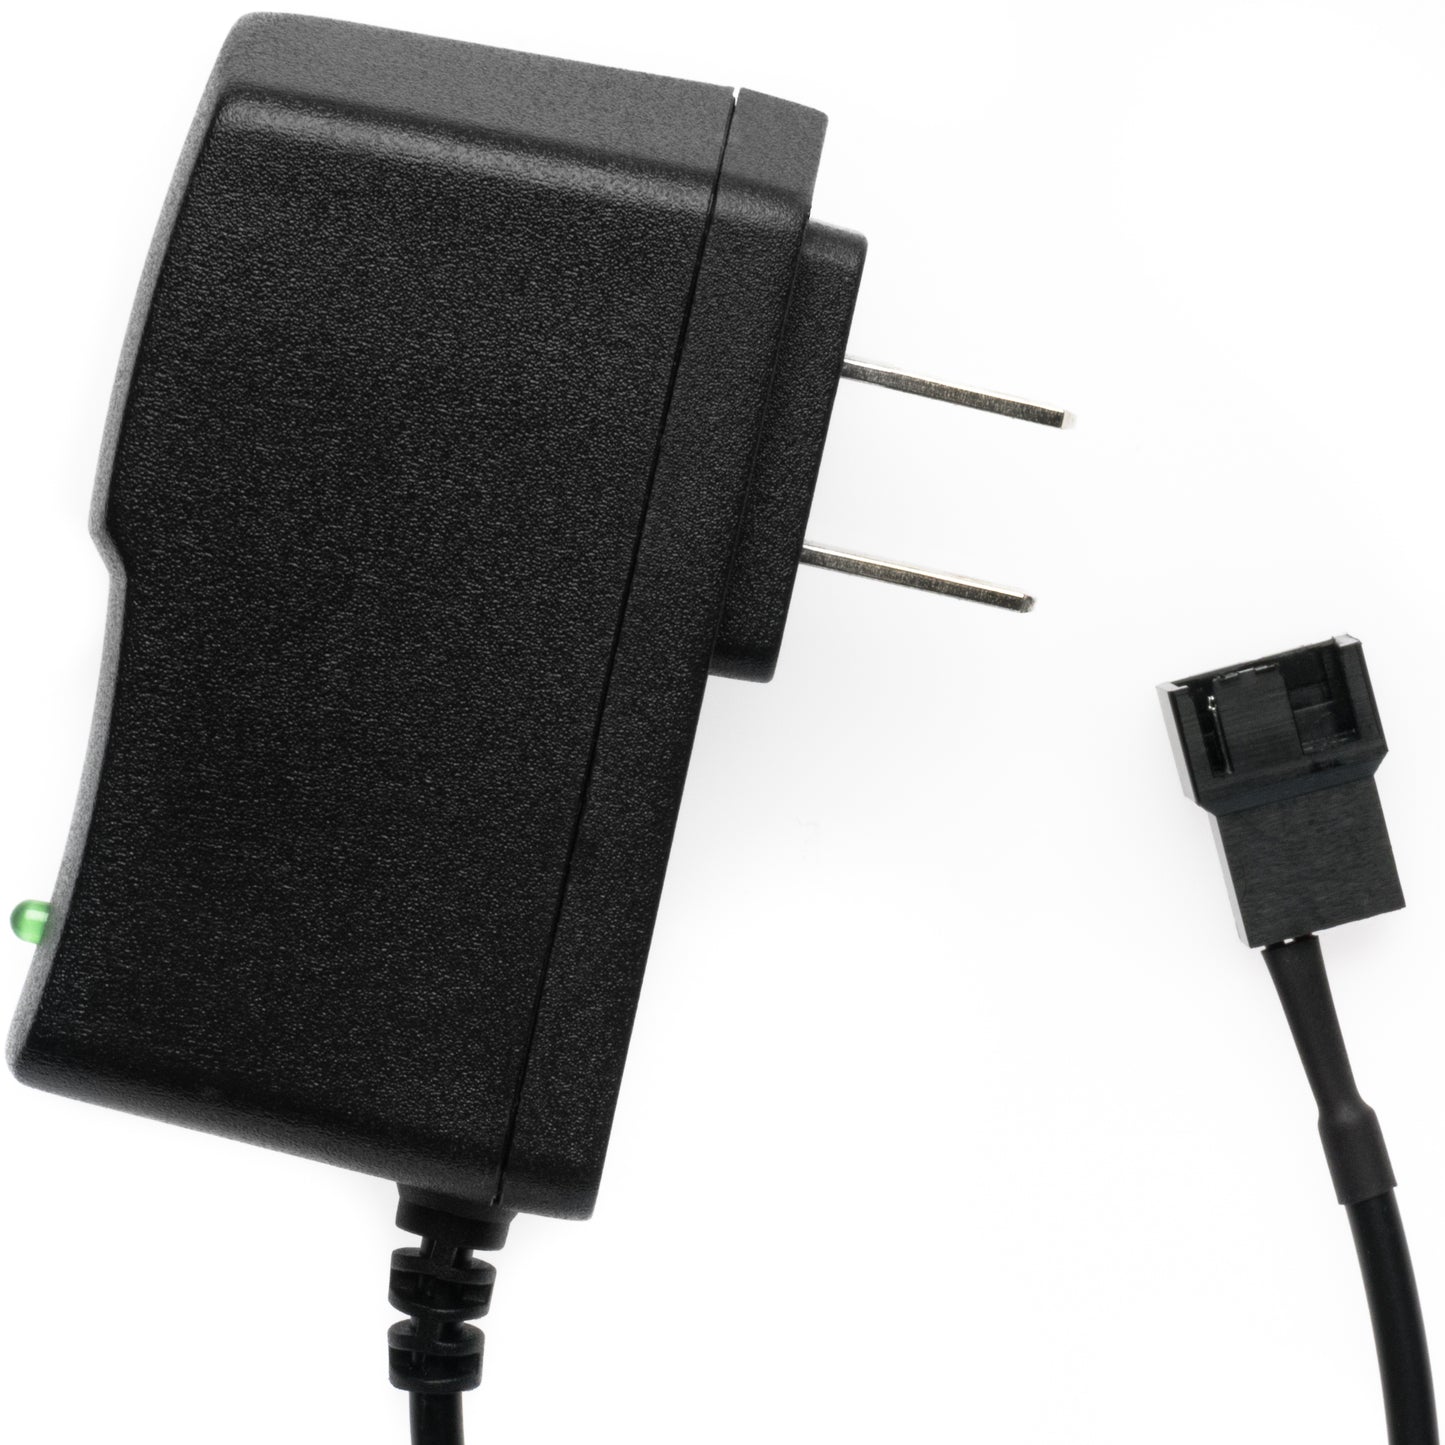 DC 12V Power Supply for One 4-Pin PC Fan